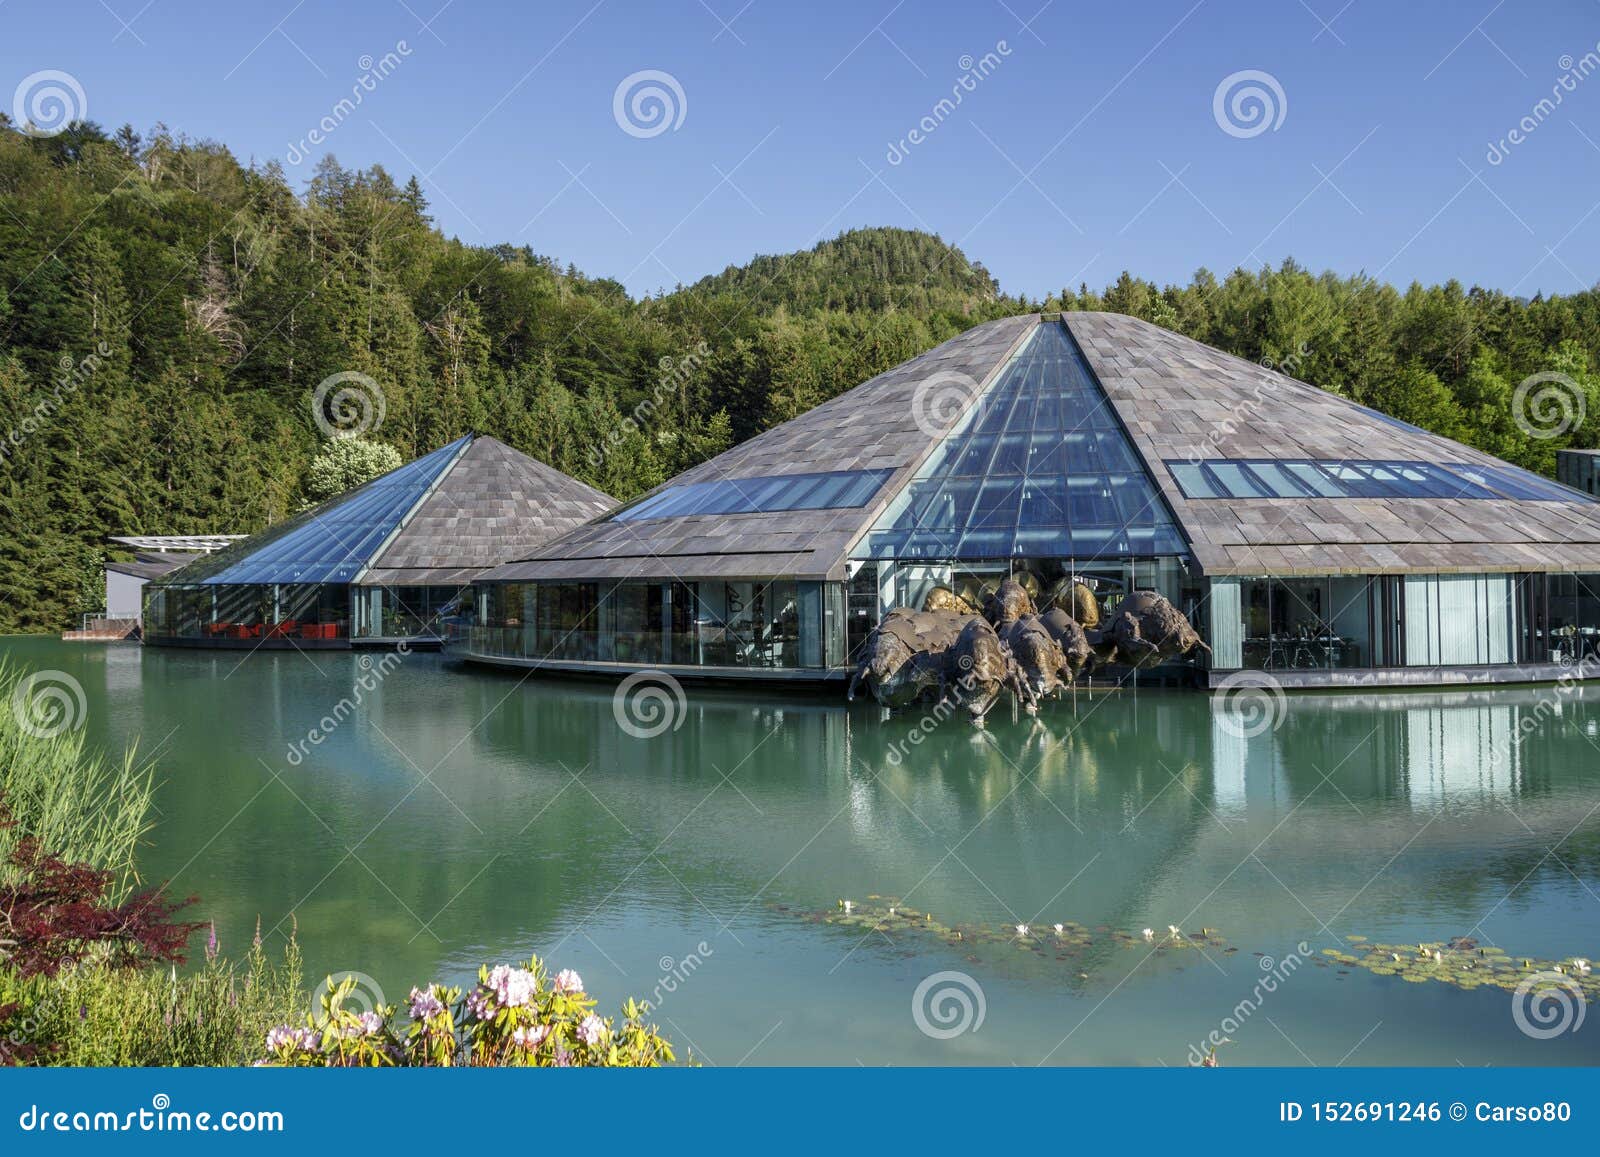 Red Bull Headquarters in Fuschl am See, Austria, 2019 Editorial Photo -  Image of bronze, office: 152691246